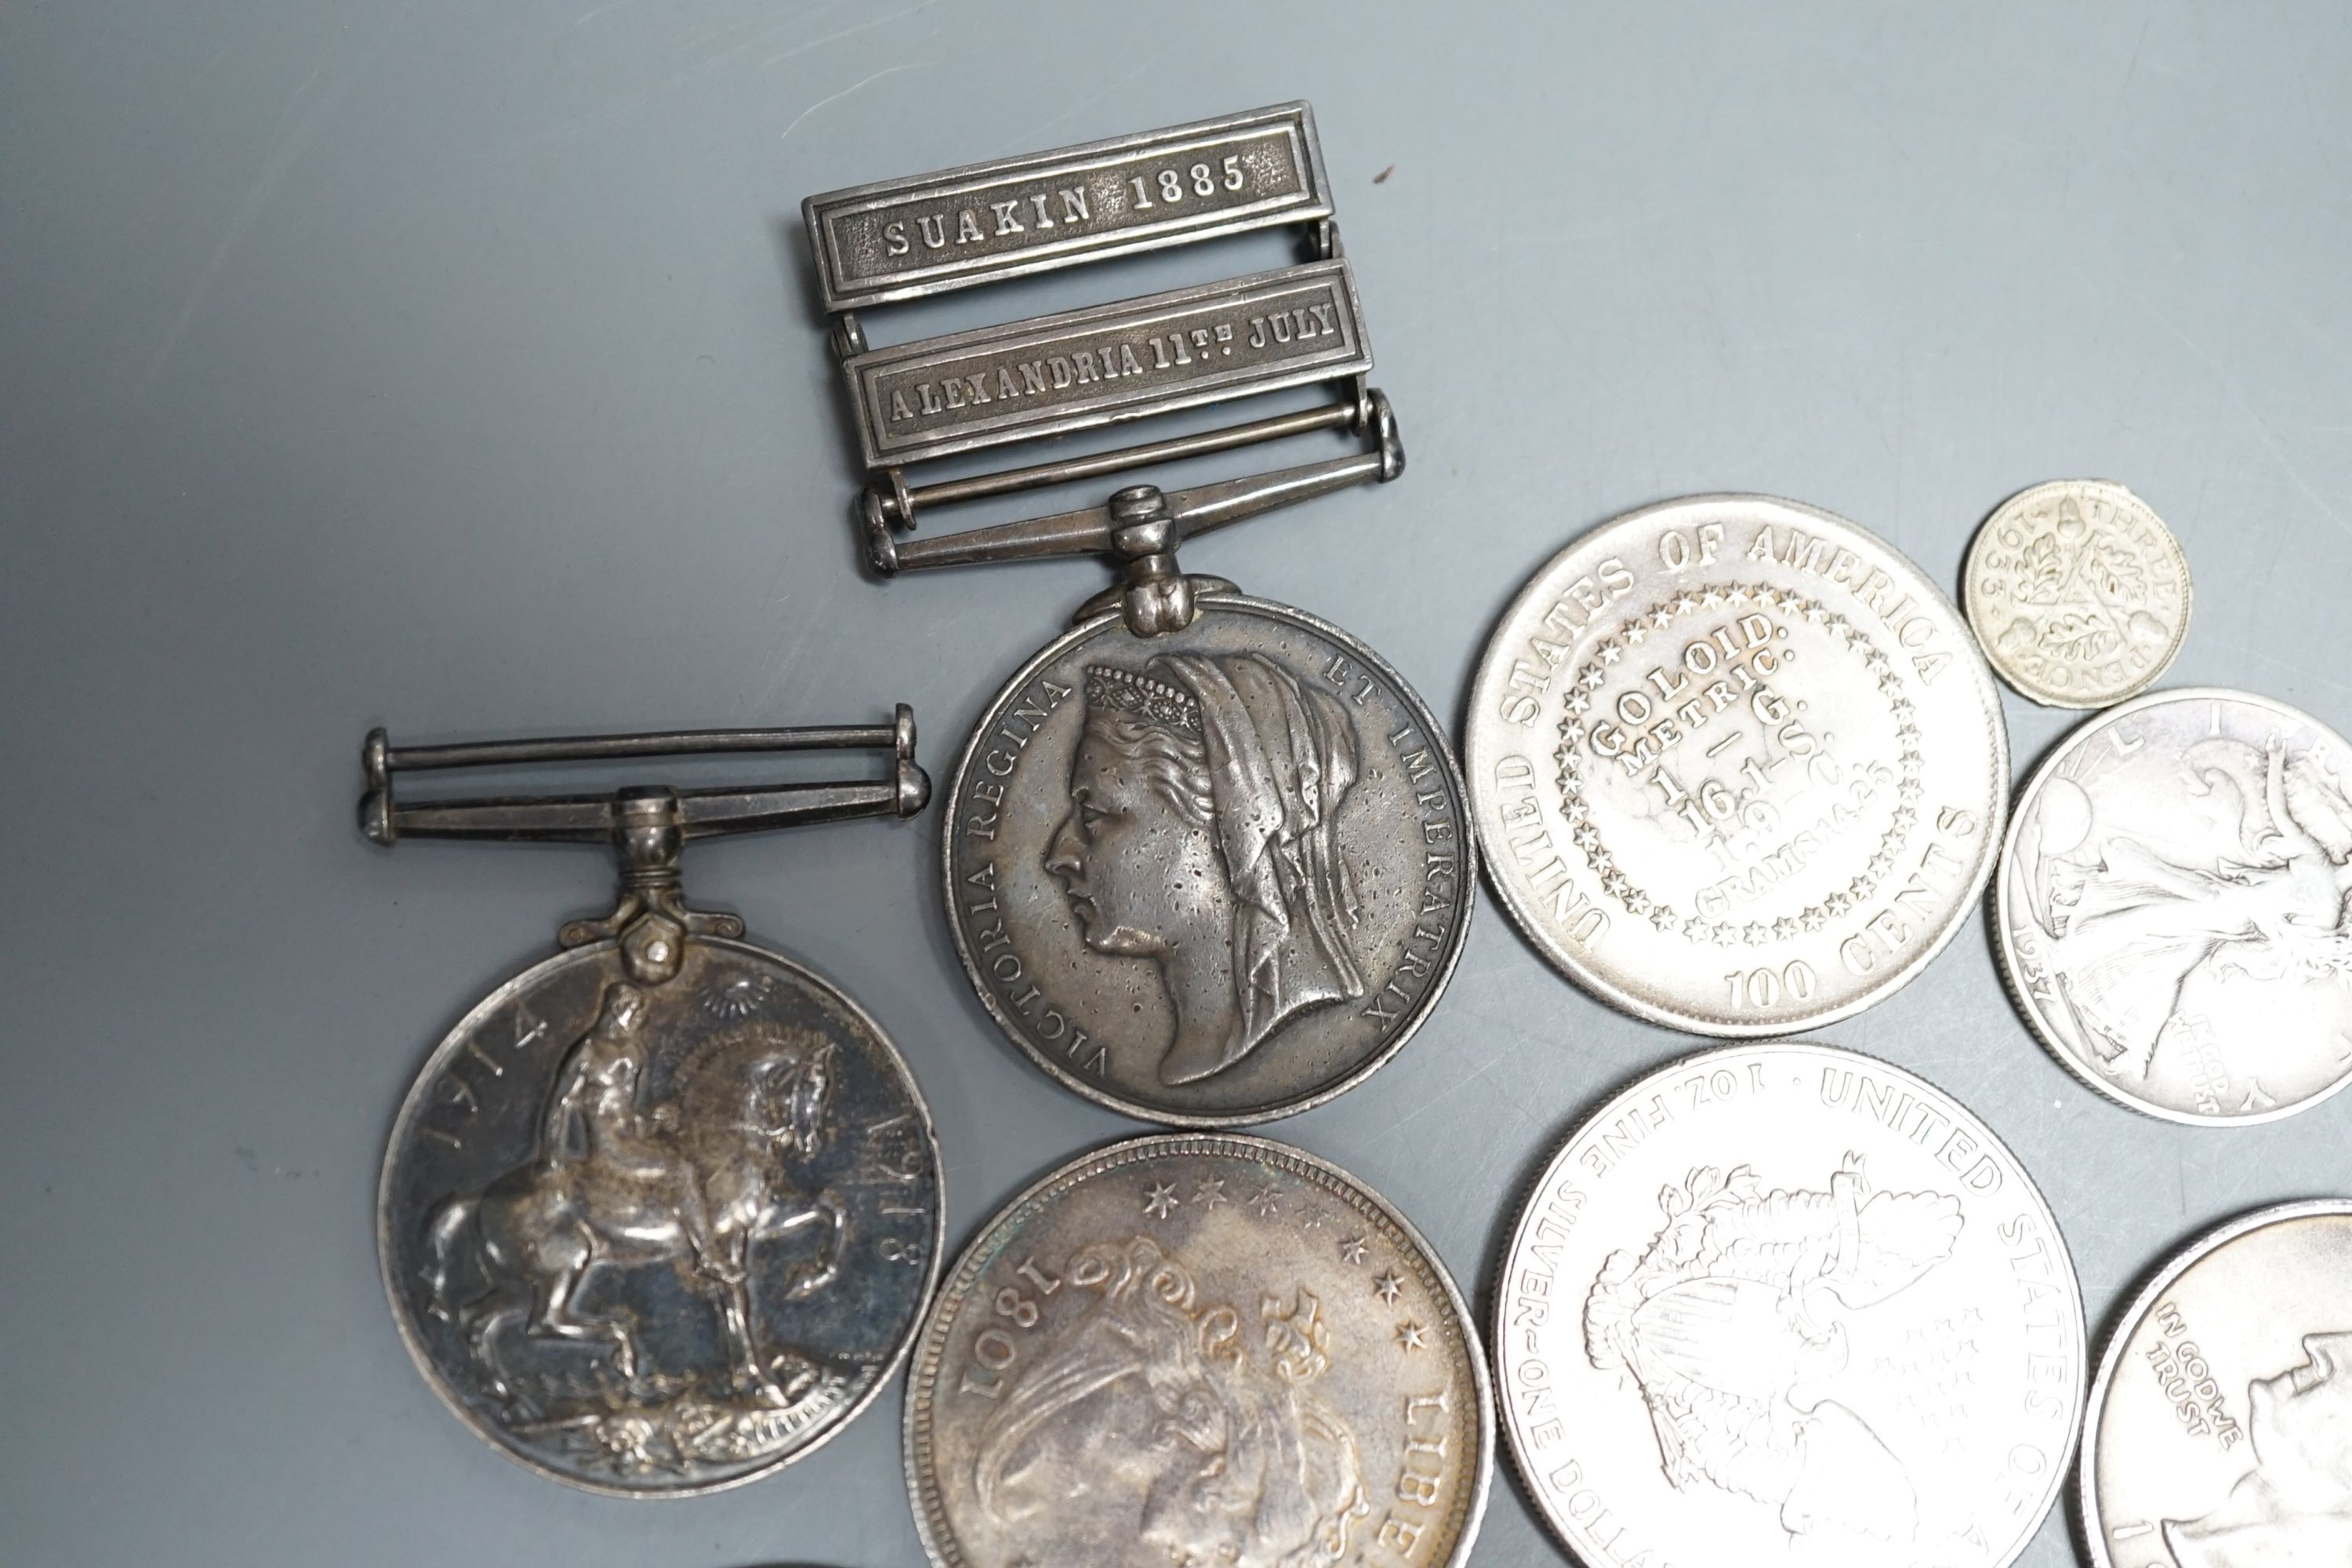 WWI medals including Egypt medal with Suakin 1885 and Alexandria 11th July clasps, to R.F. Hewitt 2nd Capt. HMS Sultan and assorted coinage.